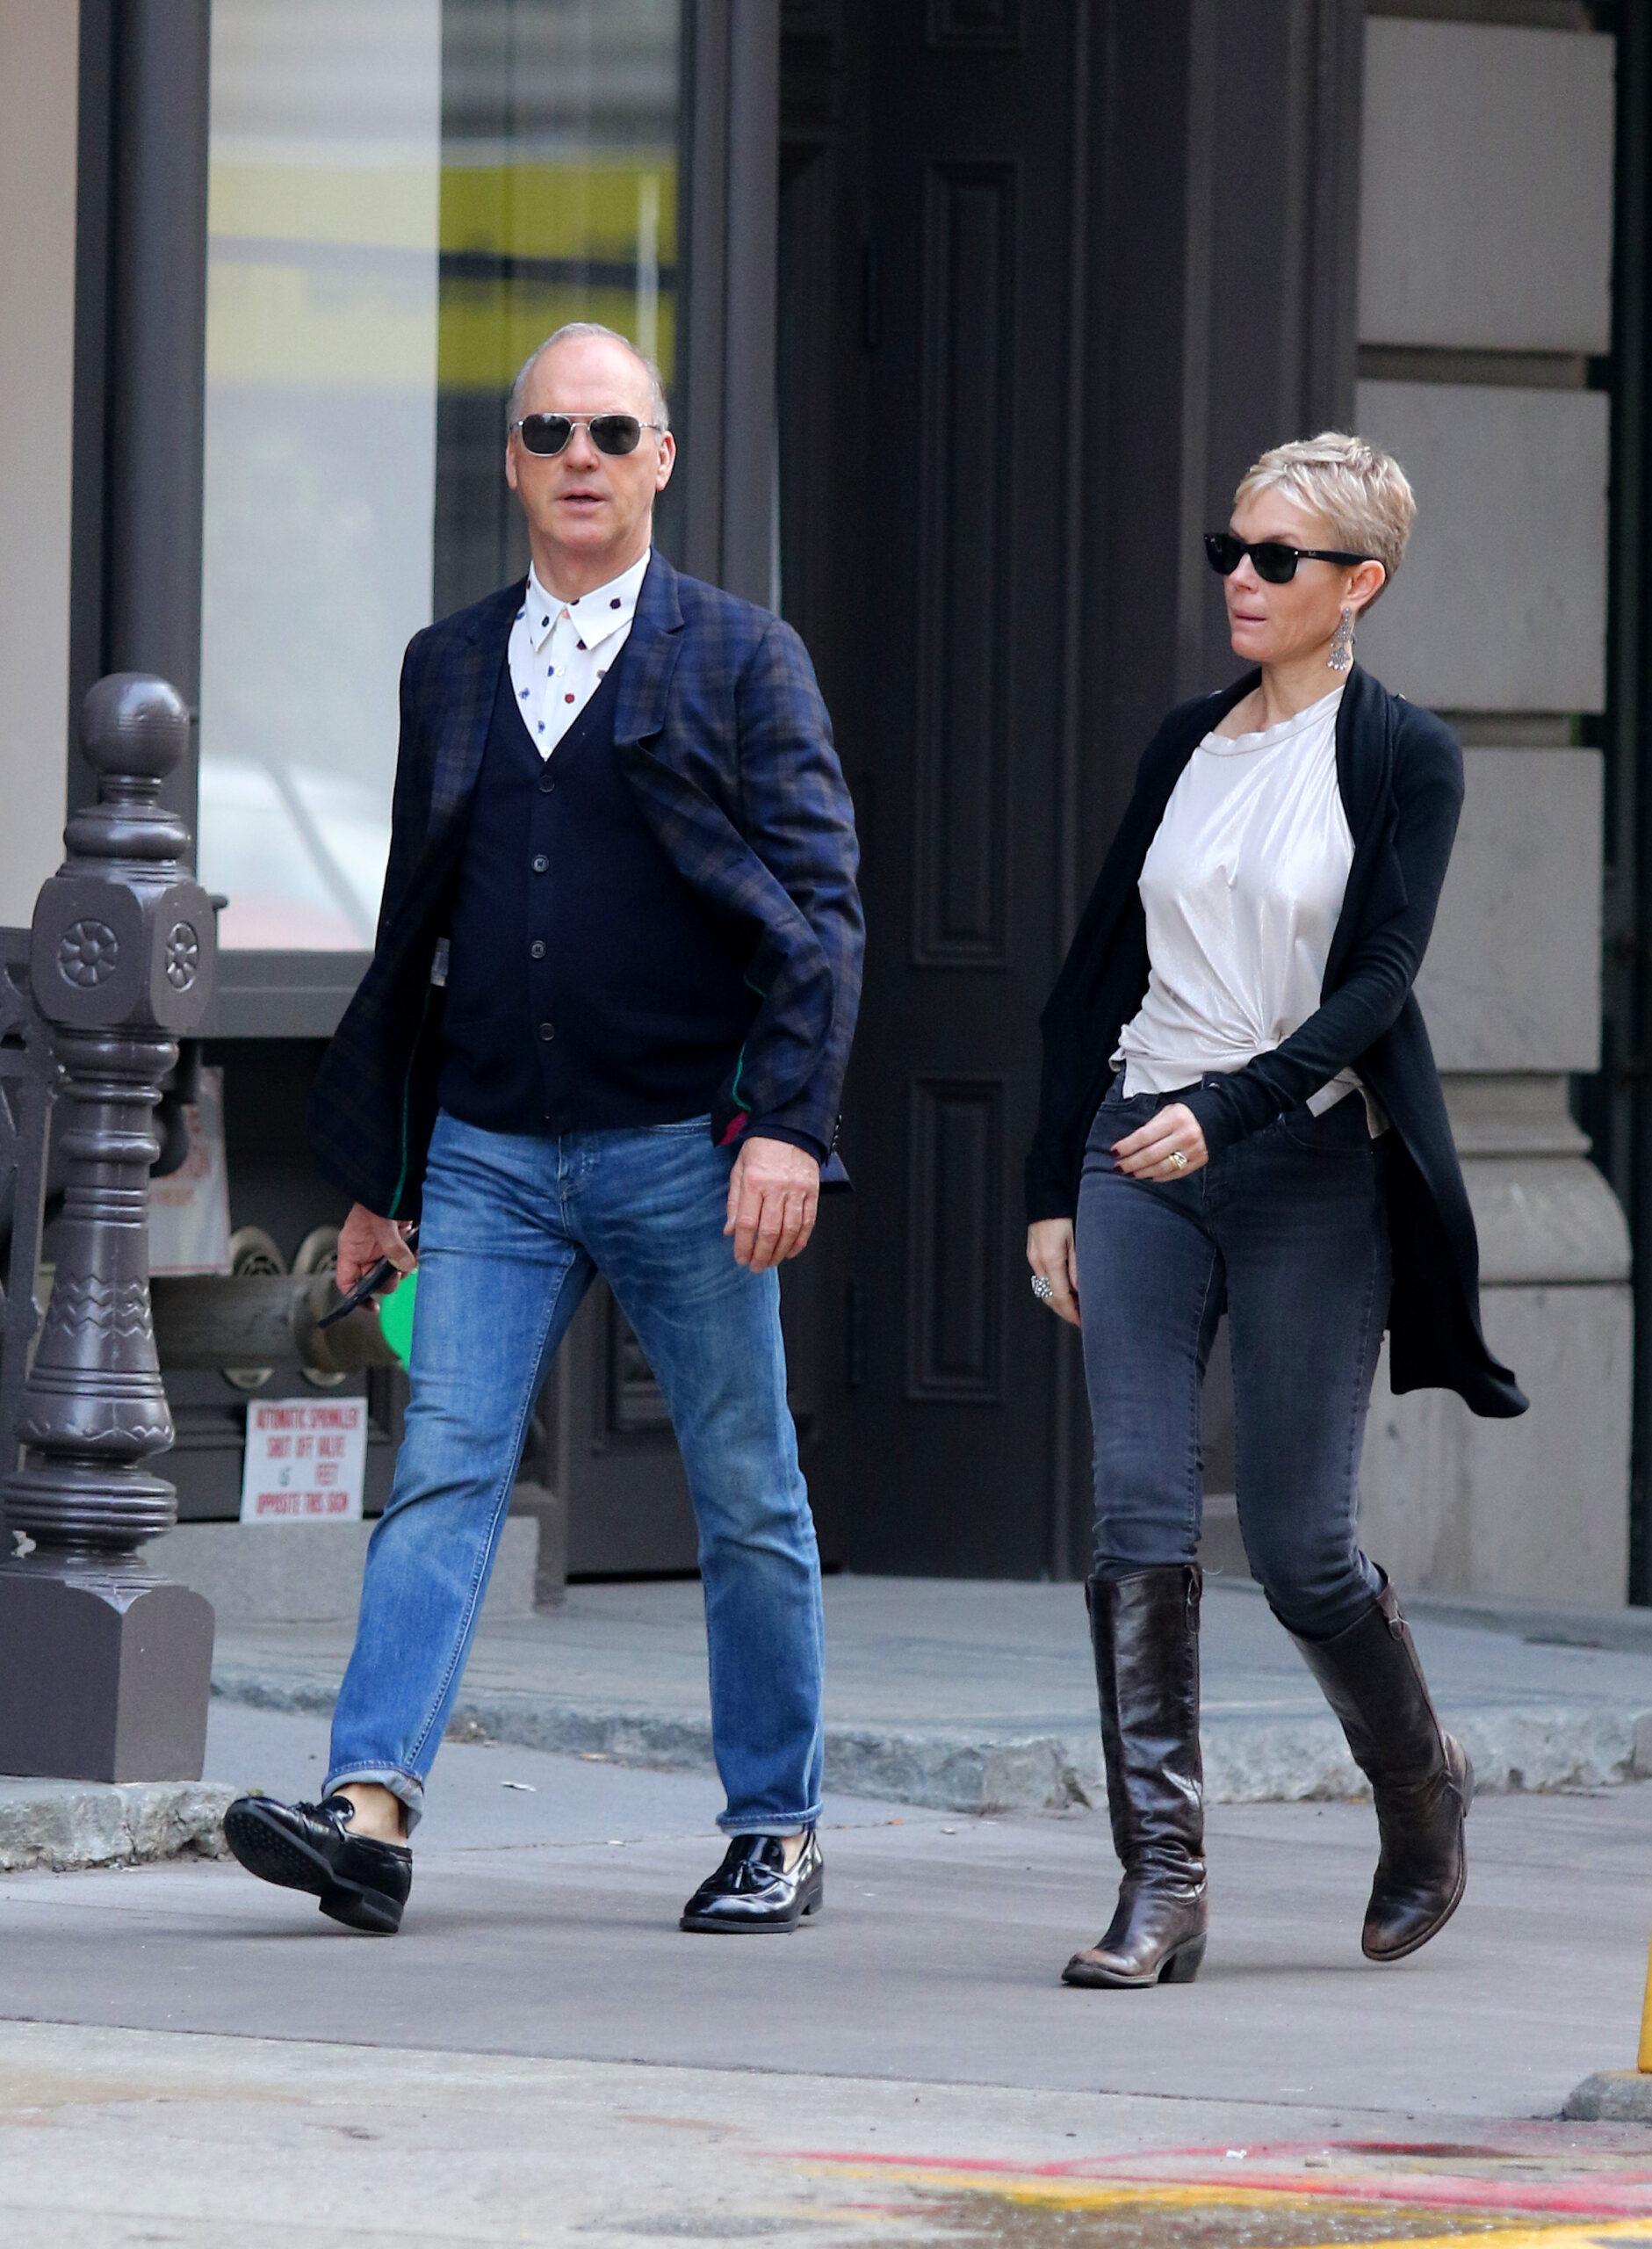 Michael Keaton and girlfriend go out for dinner in New York City